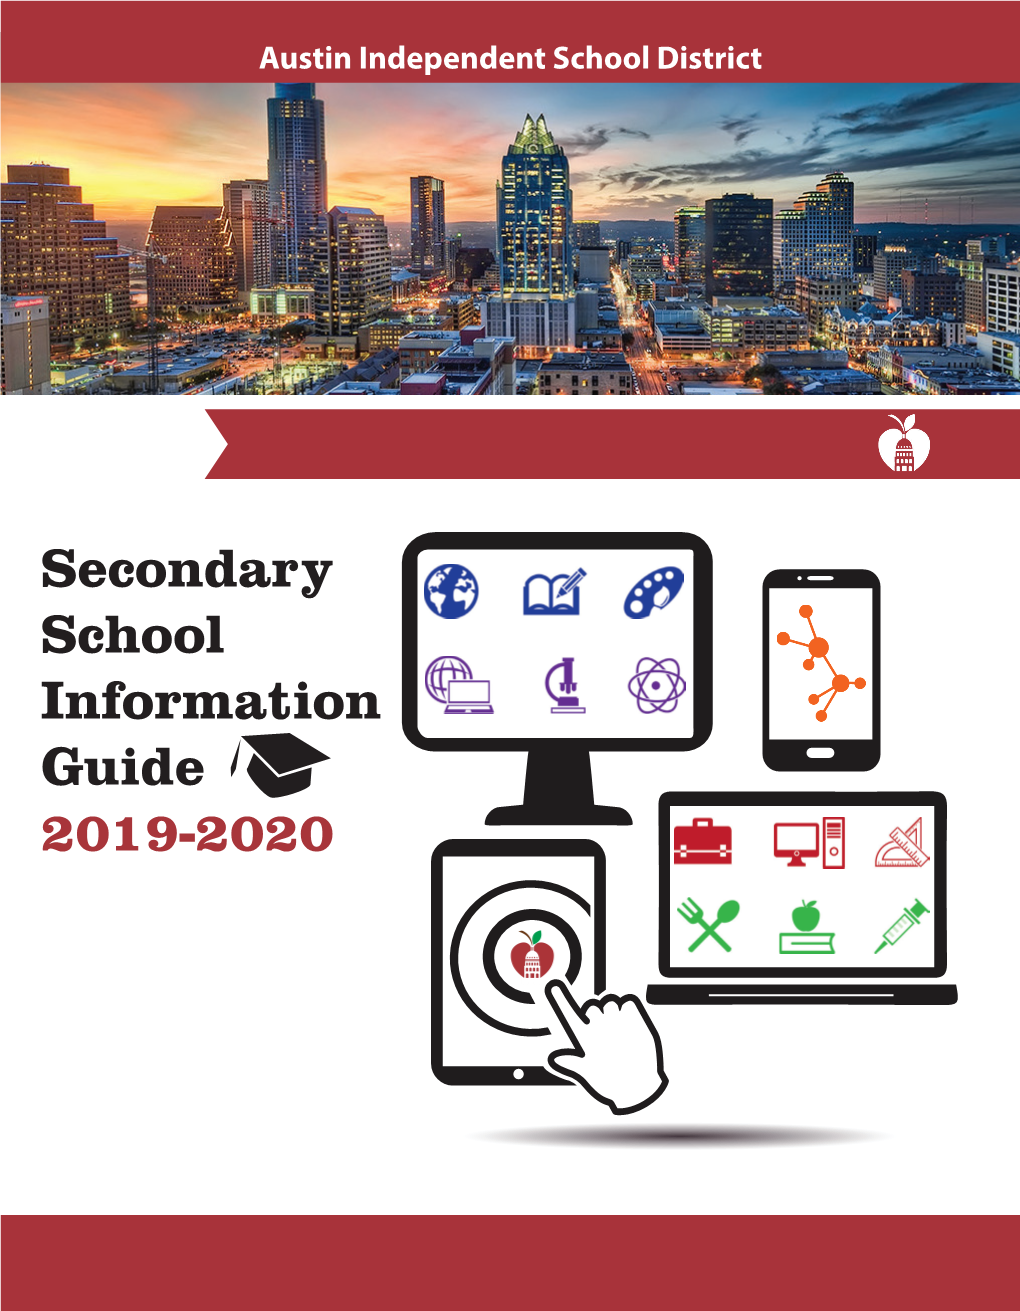 Secondary School Information Guide 2019-2020 the Purpose of the Secondary School Information Guide